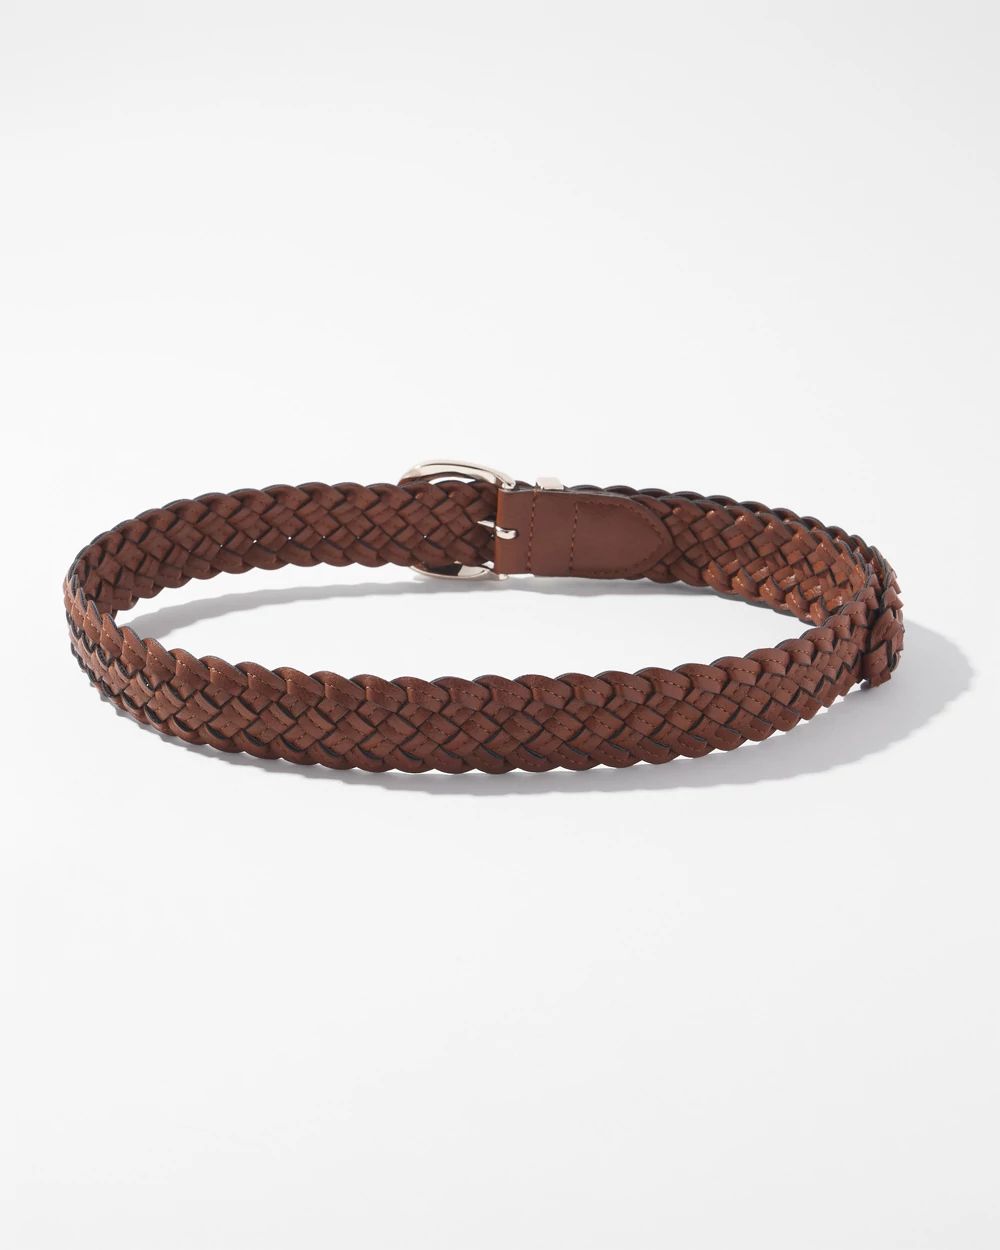 Braided Leather Denim Belt click to view larger image.